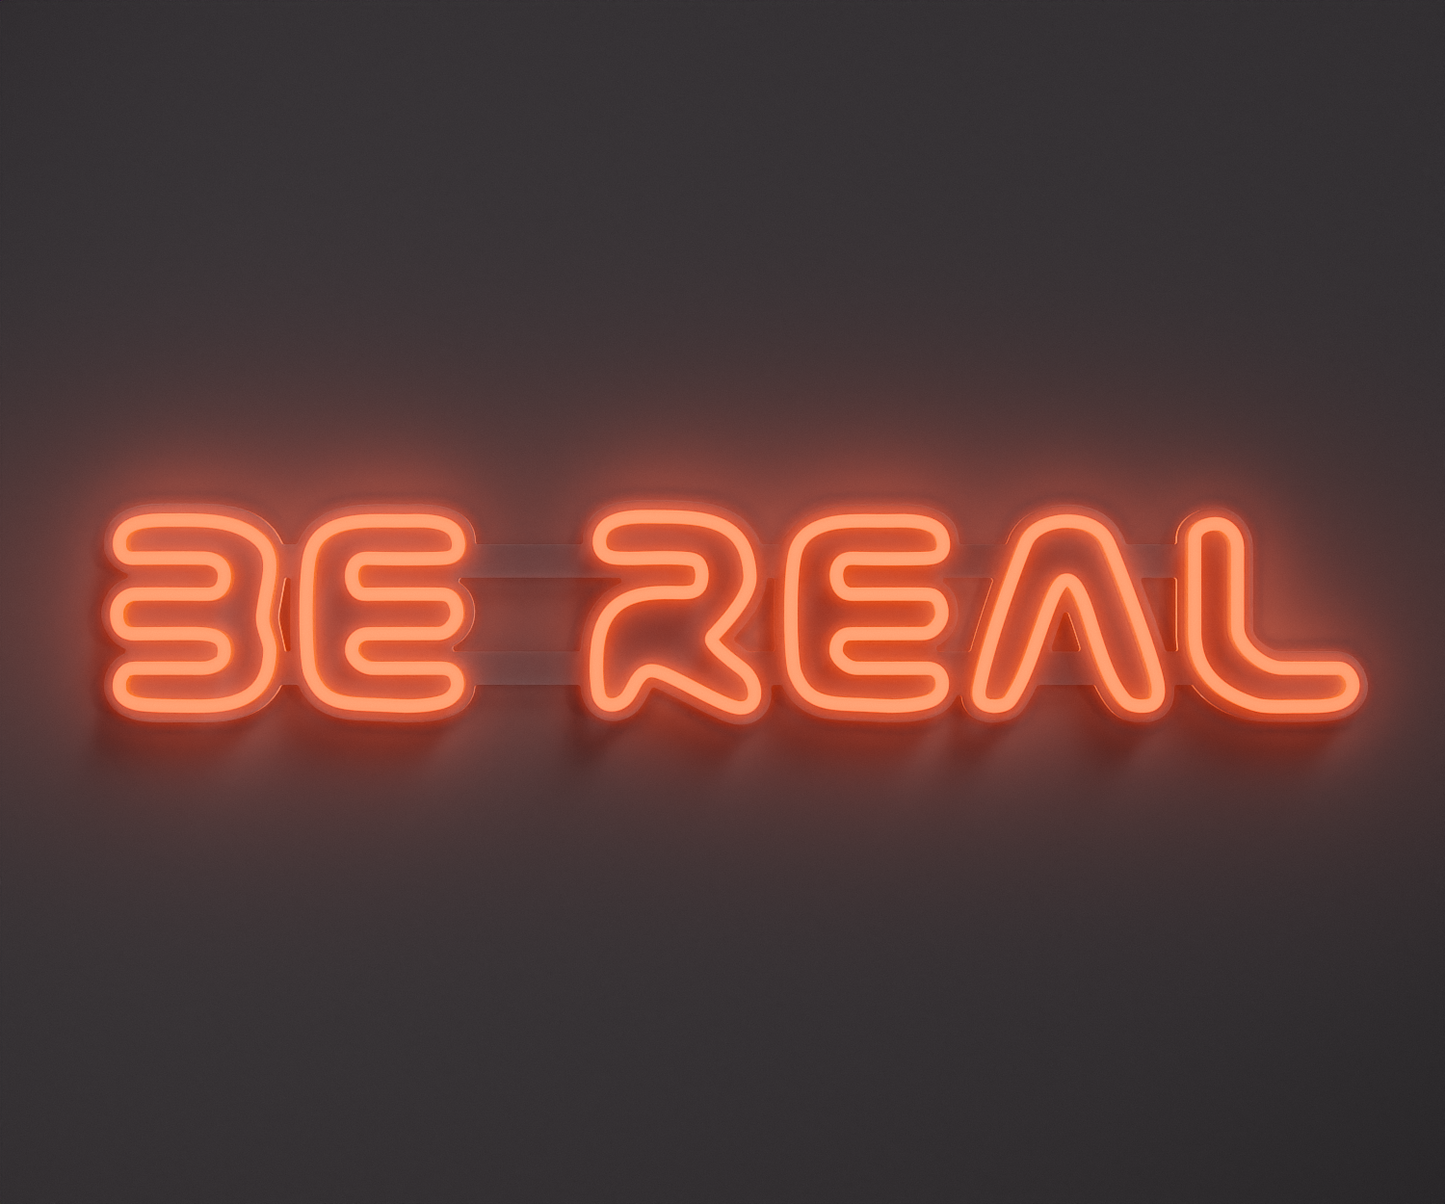 Light Orange neon sign that says be real